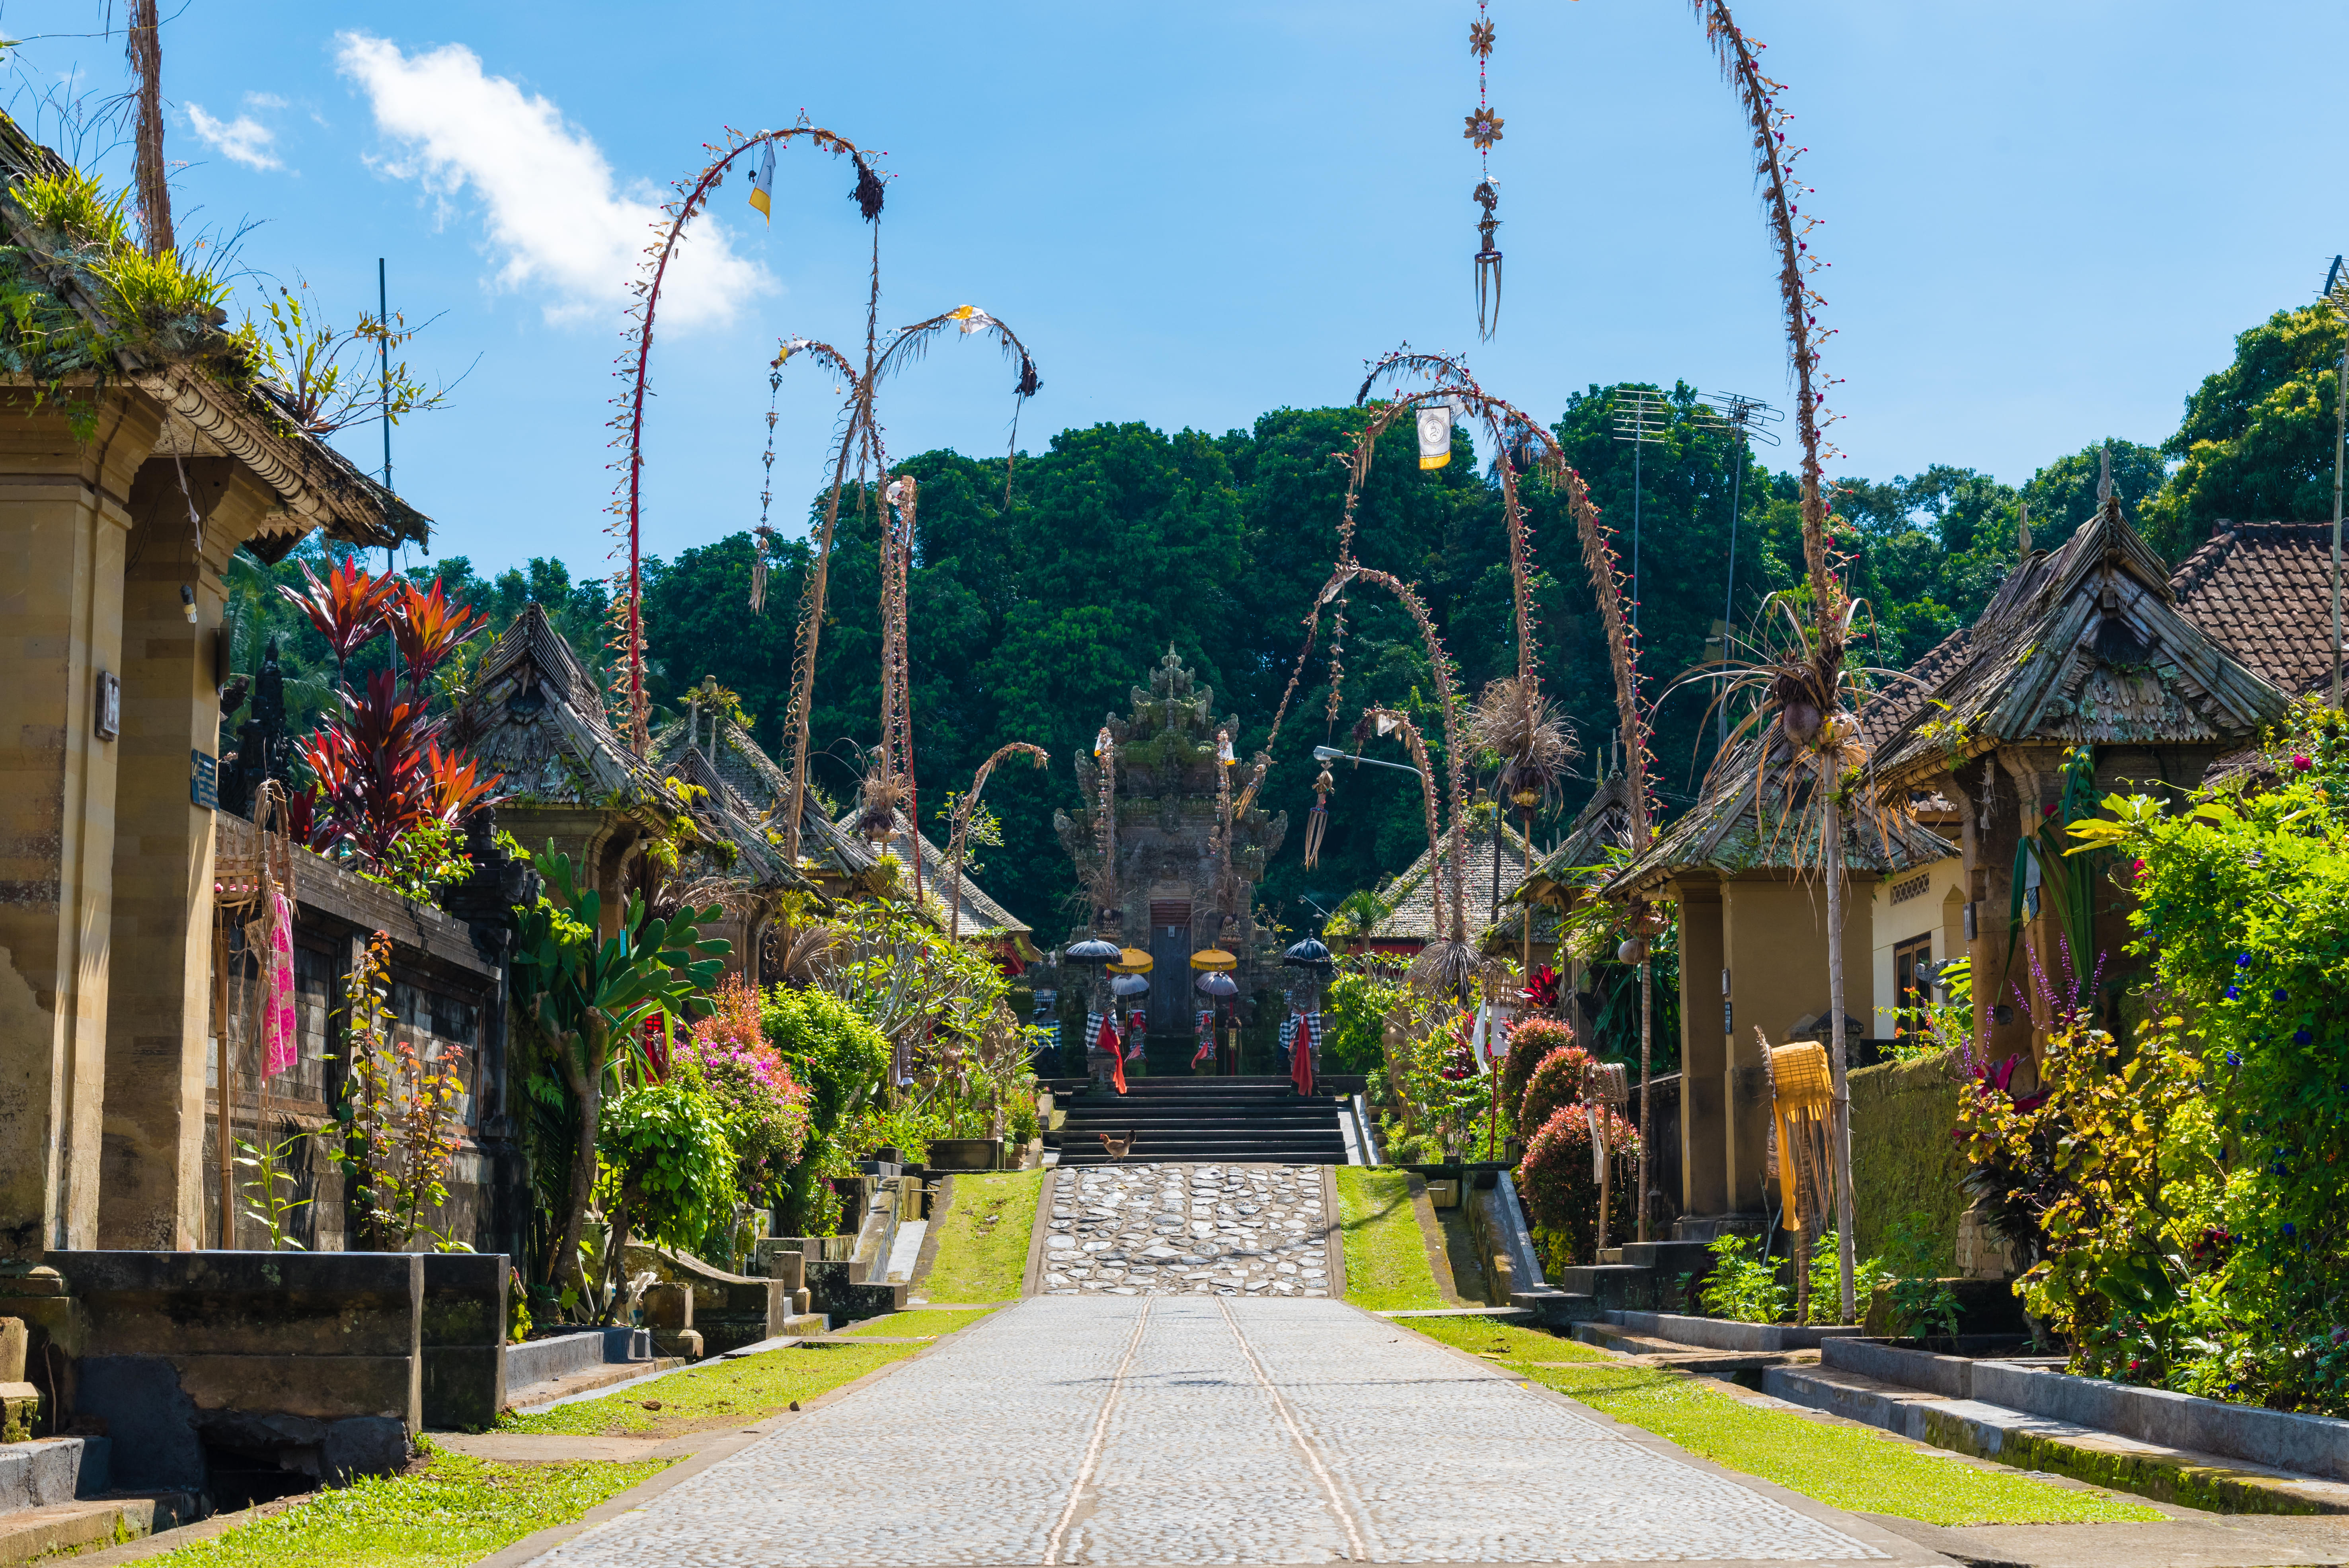 Walk through the traditional styled village of Bali - The Penglipuran Village, to understand the balinese lifestyle